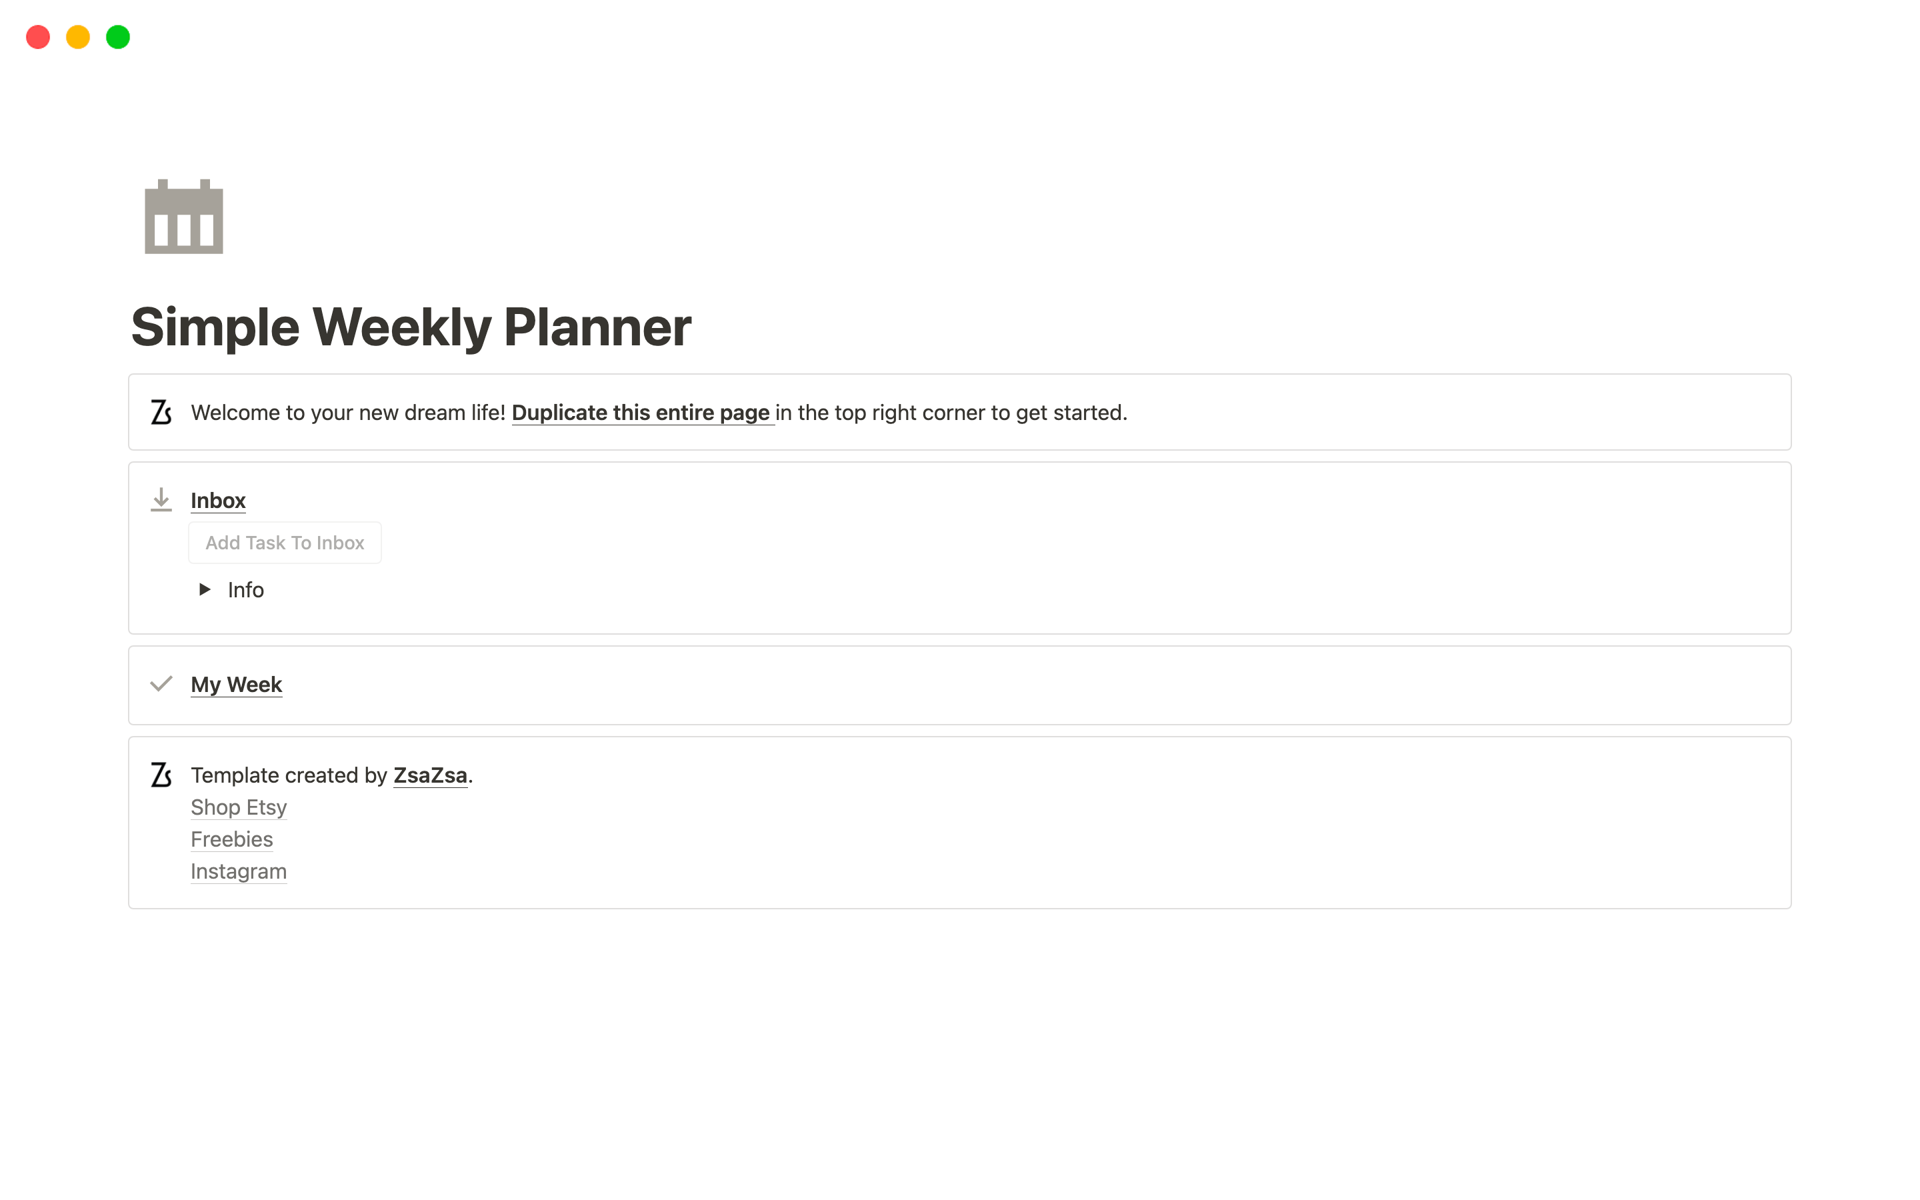 Super simple weekly planner, with inbox and categories so you can categorise your to-do list for the day. 